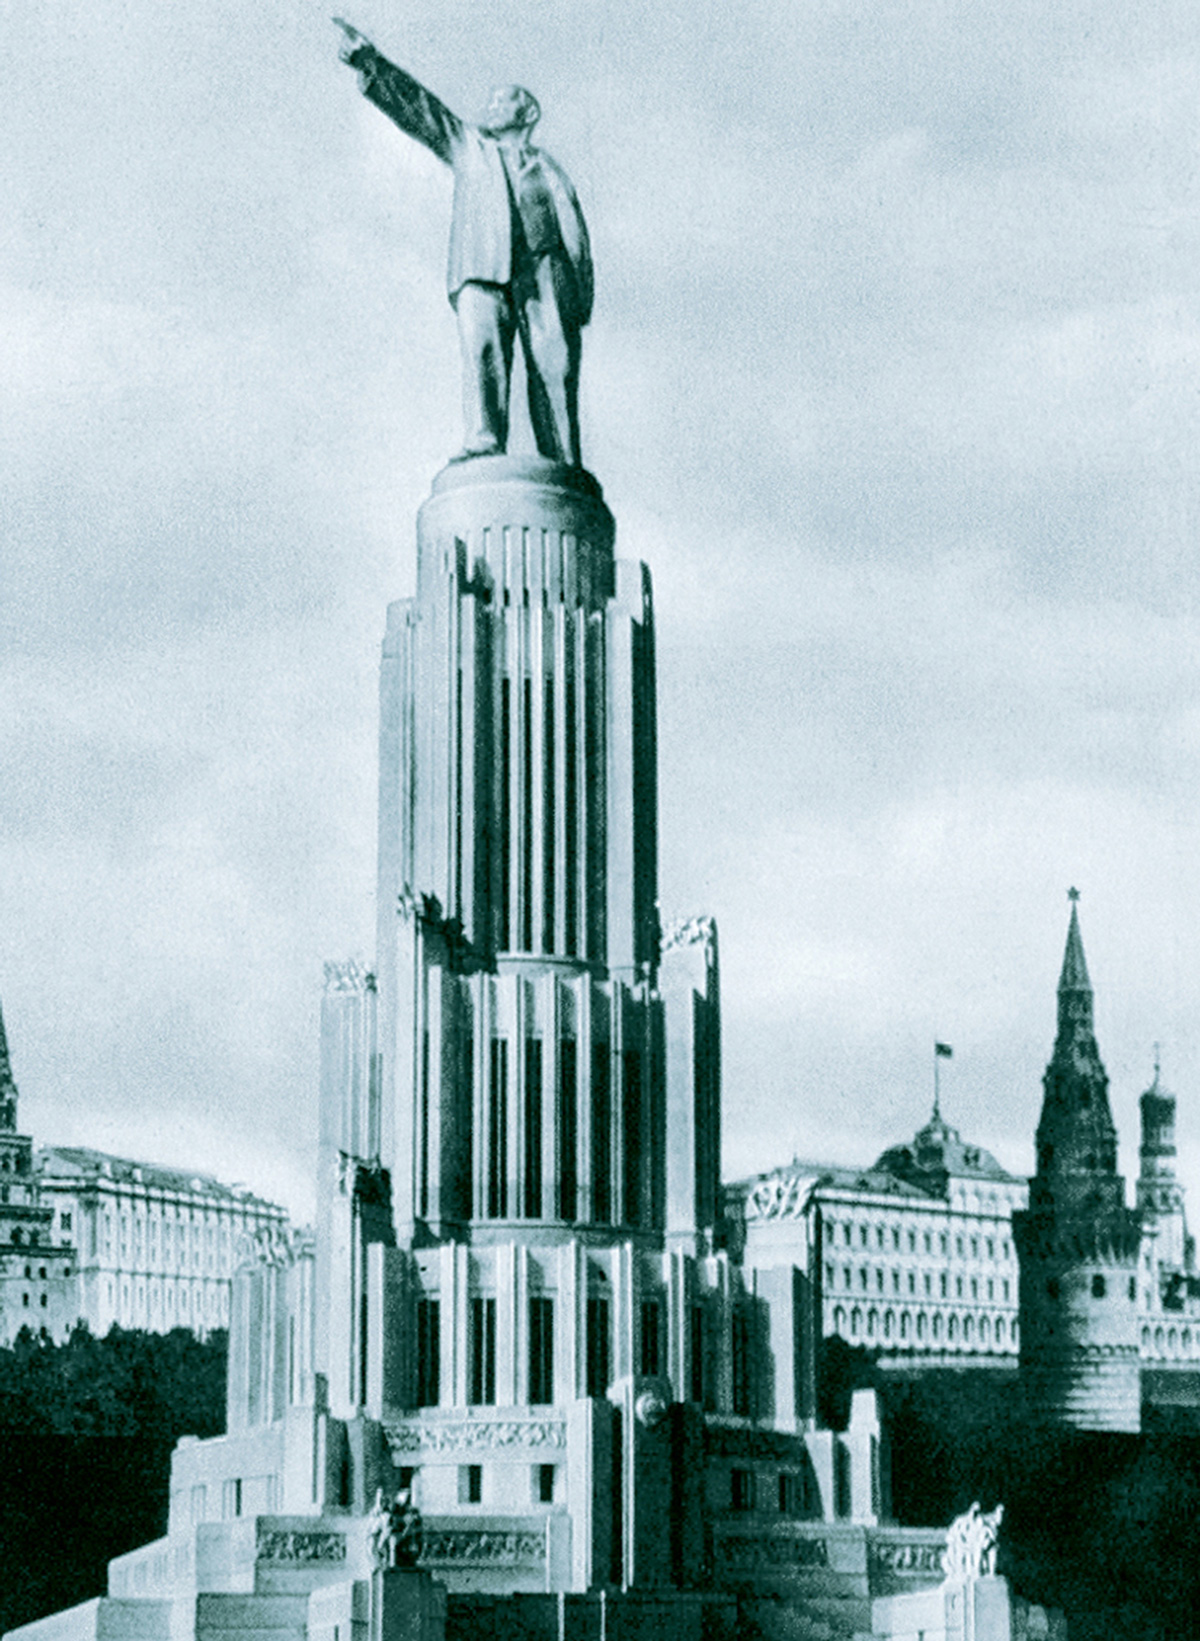 Artist’s impression of Boris Iofan’s winning proposal for the Palace of the Soviets. Though some preliminary construction began in the late nineteen thirties, the Palace was never built. 